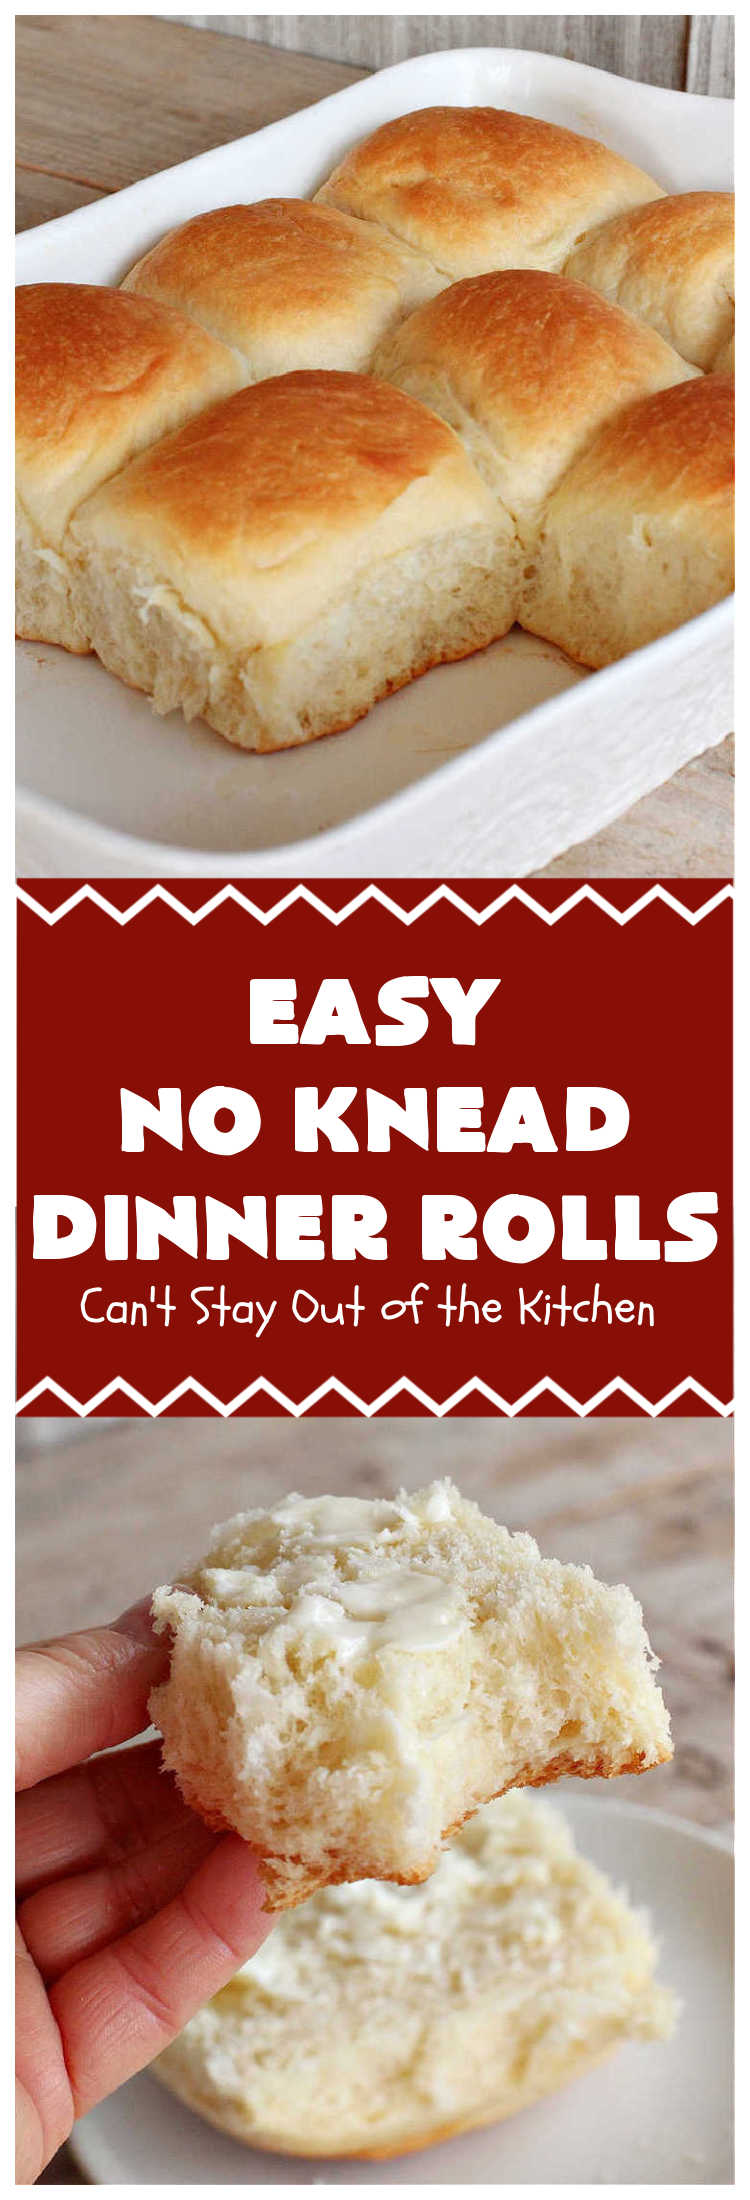 Easy No Knead Dinner Rolls | Can't Stay Out of the Kitchen